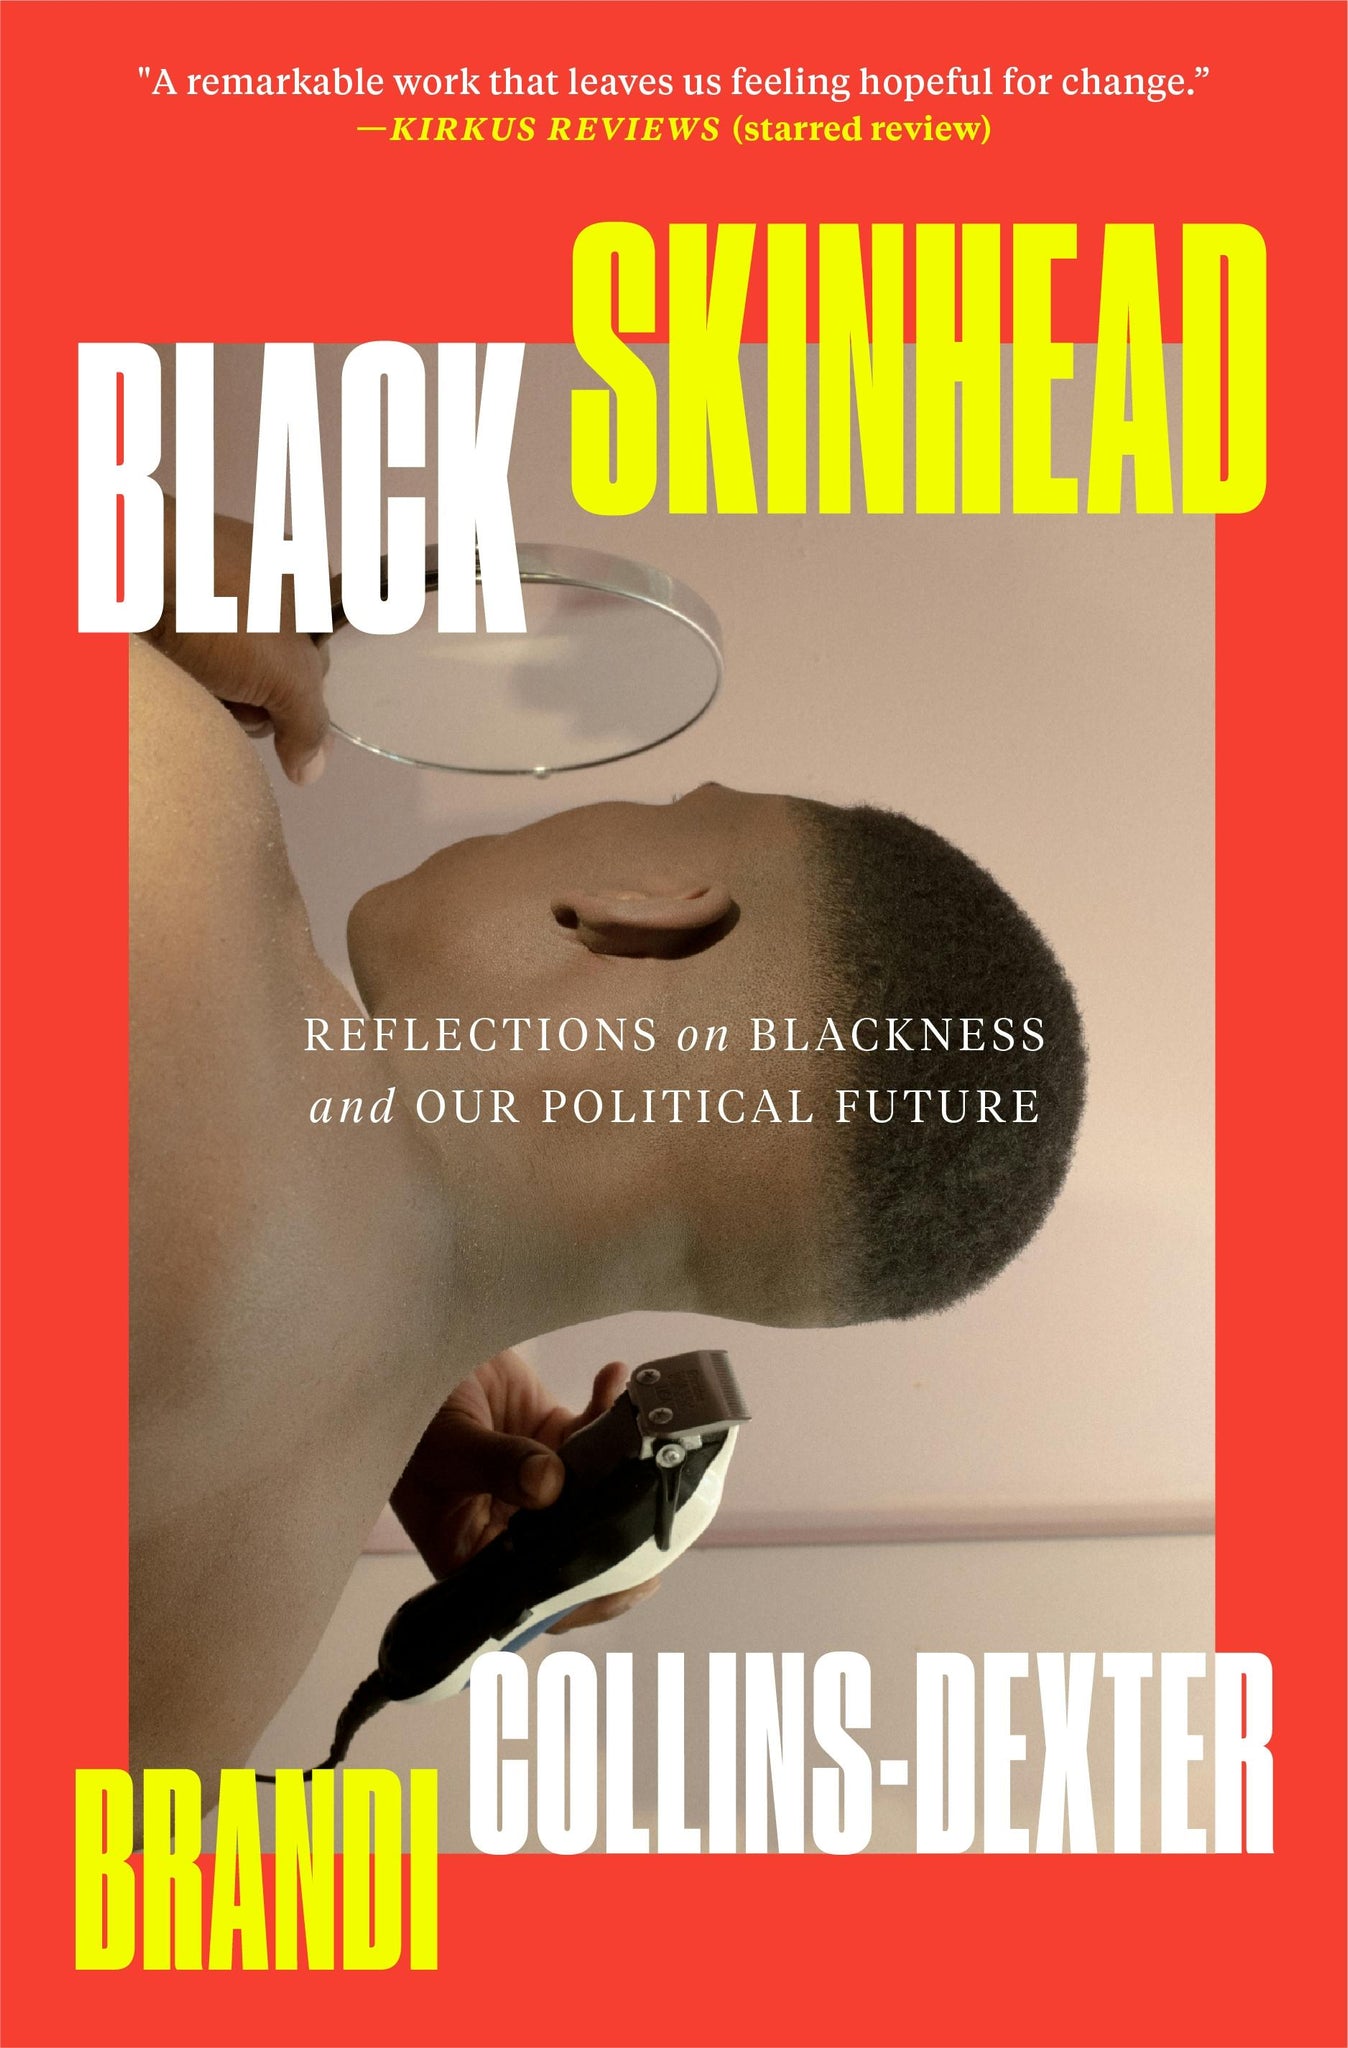 Black Skinhead: Reflections on Blackness and Our Political Future (Paperback)